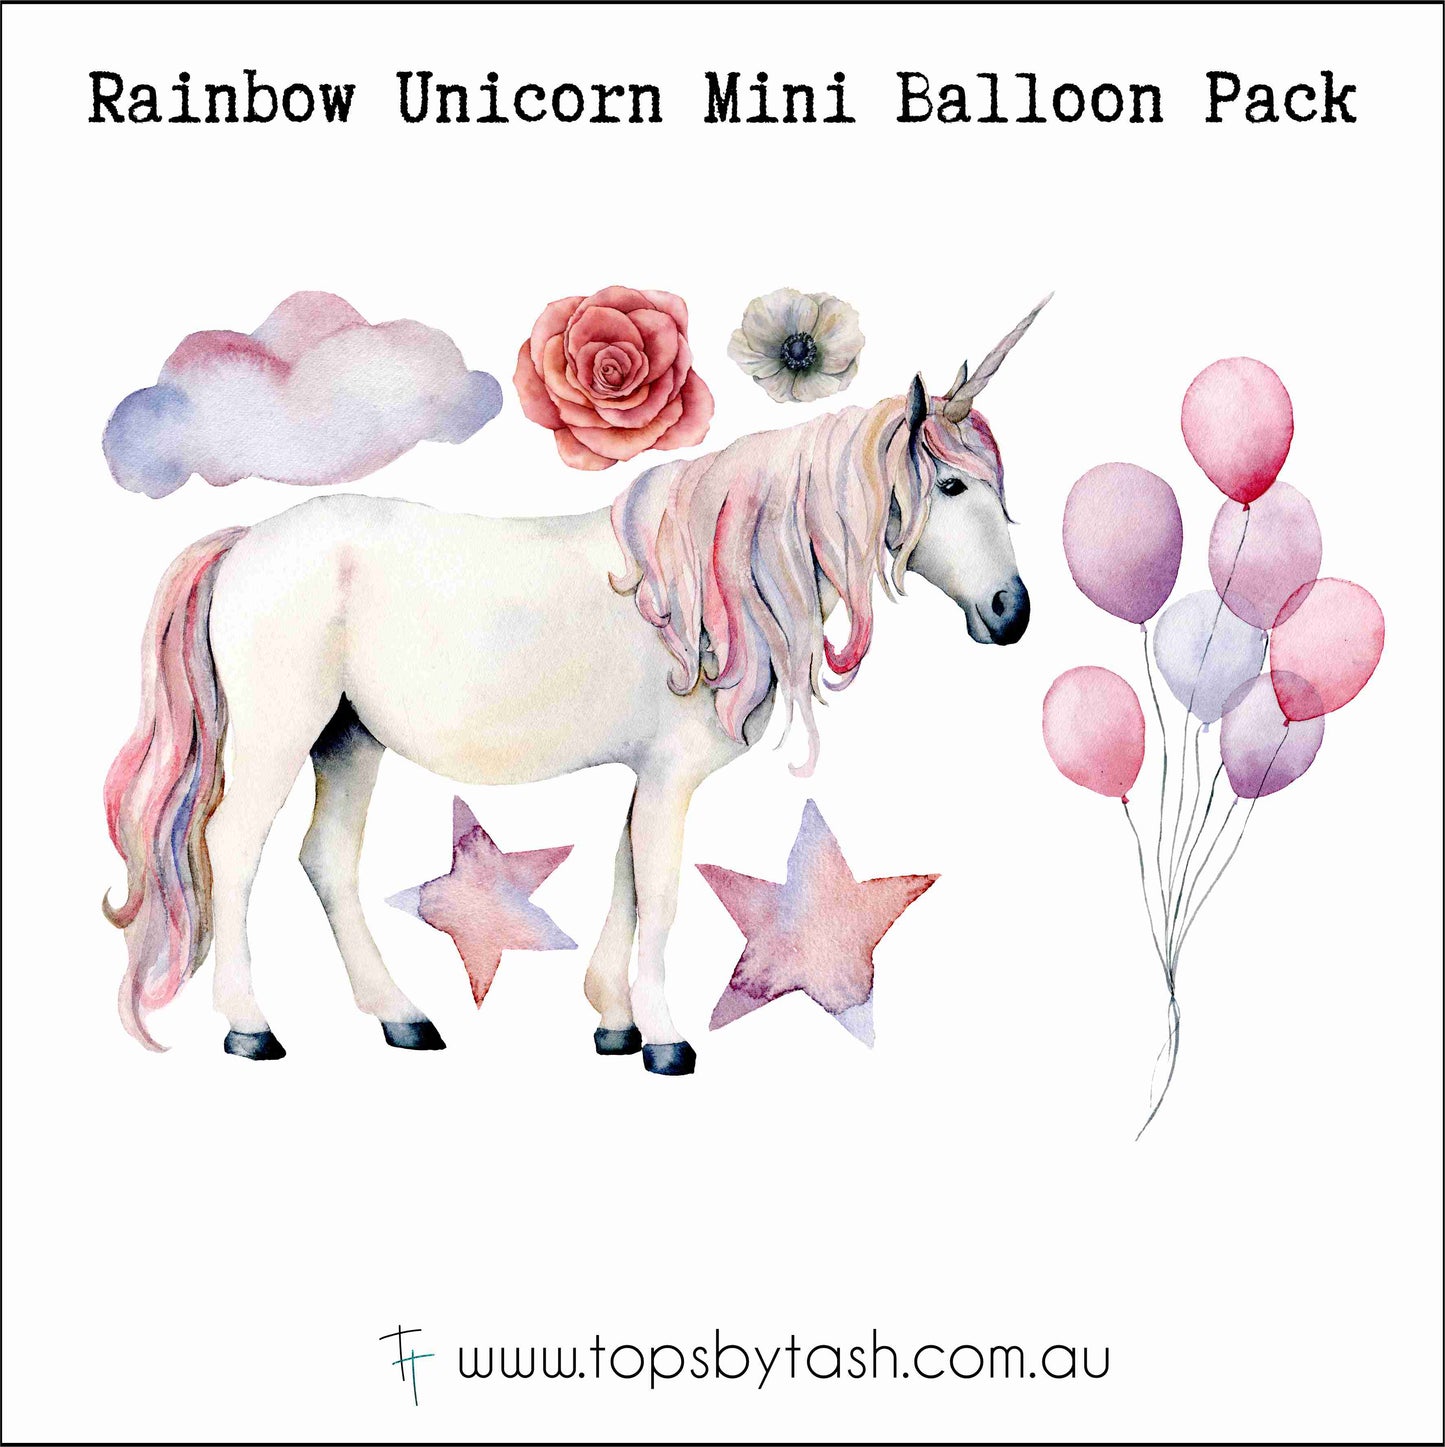 Wall Decals - Rainbow Unicorn collection